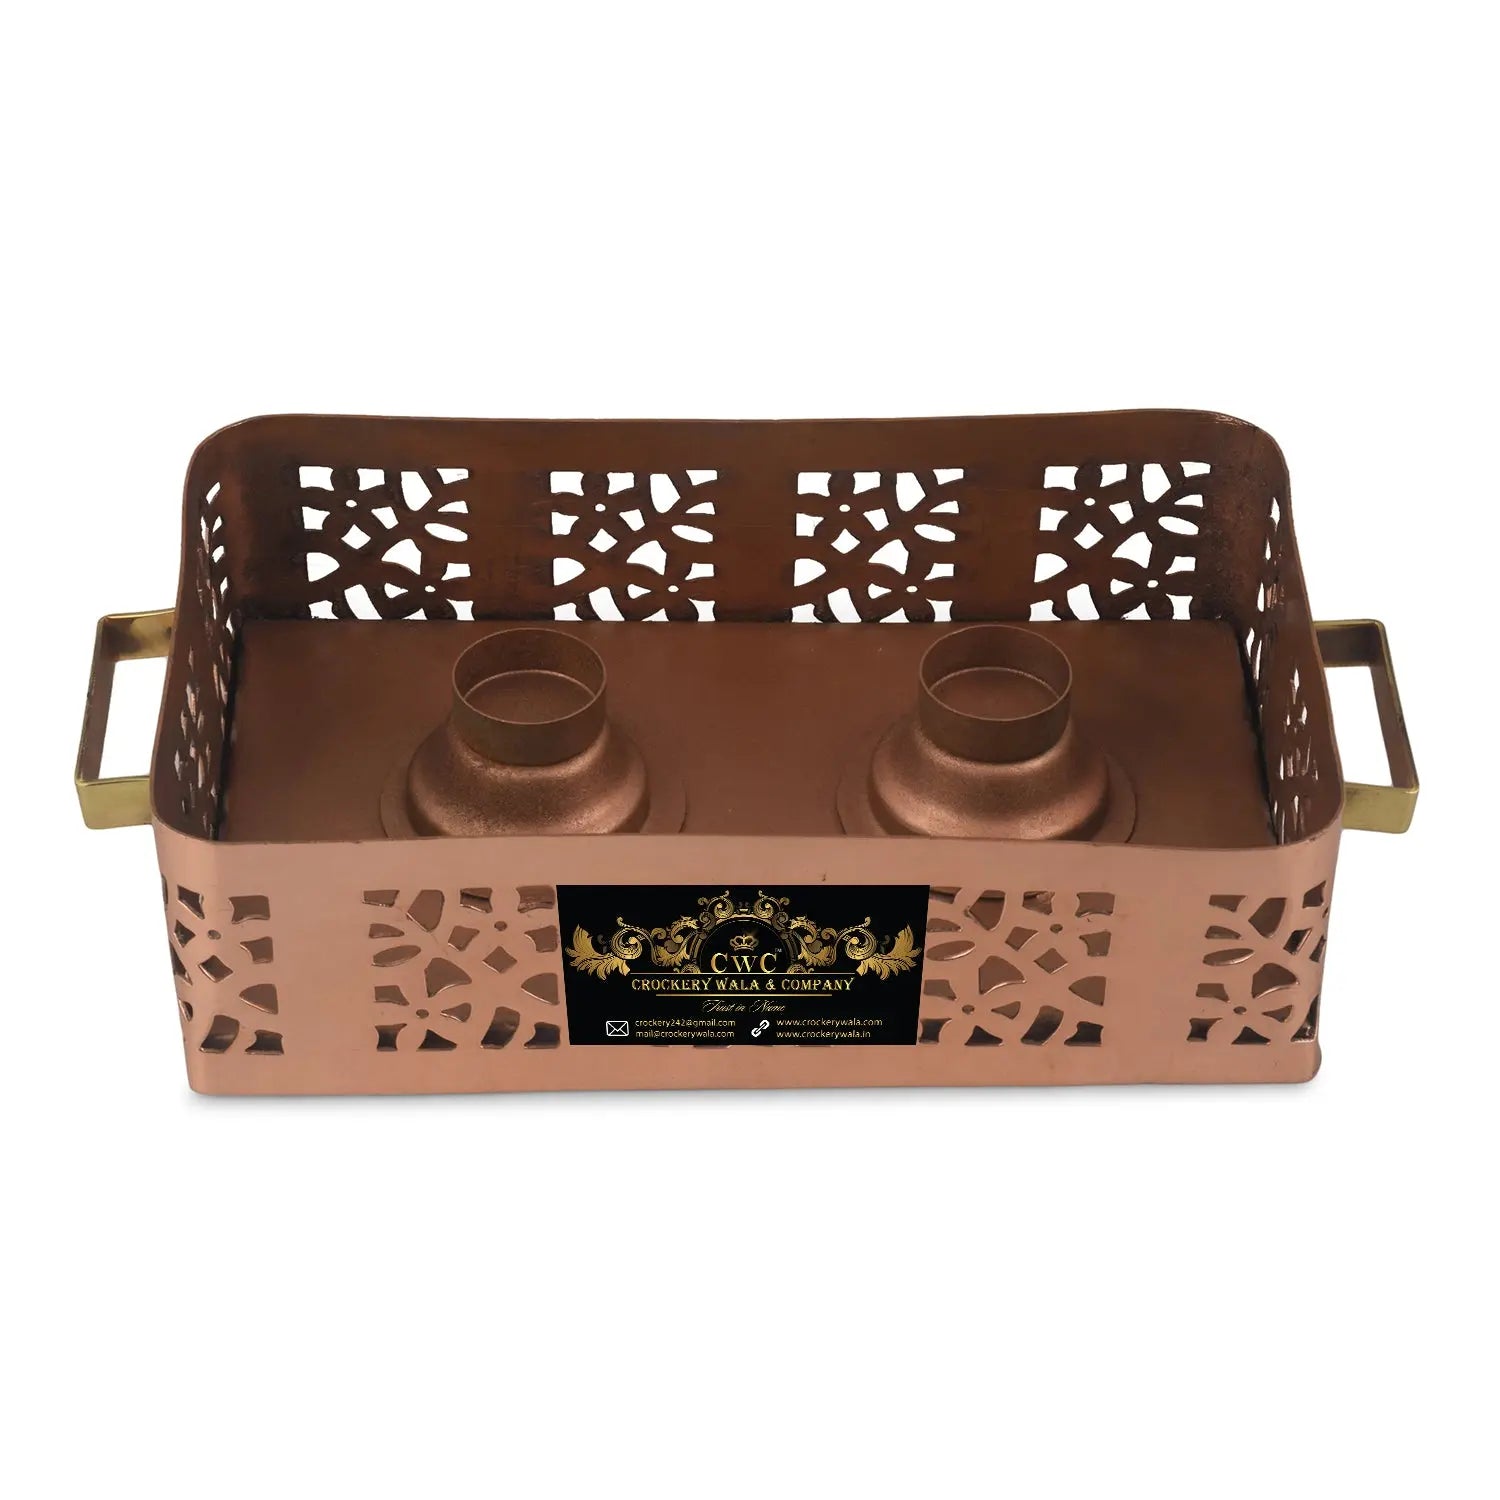 Pure Copper Snack Warmer For Serving In Parties Rectangle - CROCKERY WALA AND COMPANY 